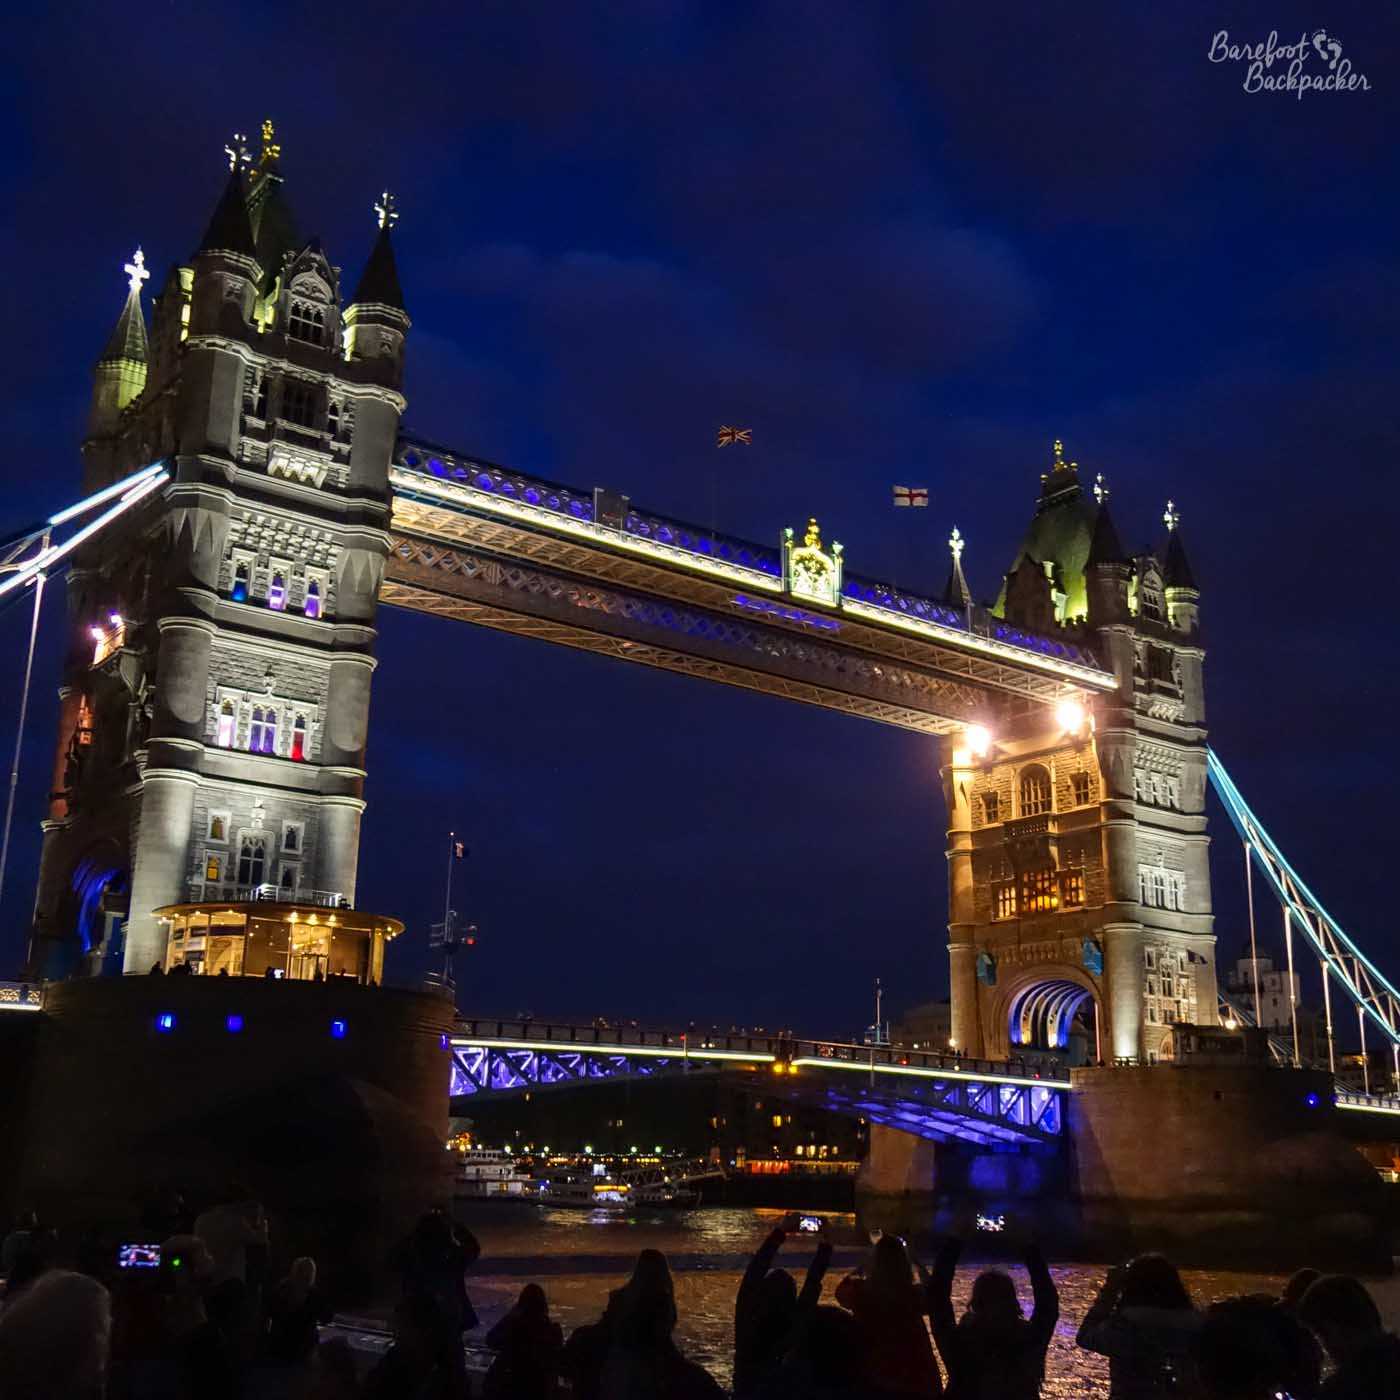 A picture of Tower Bridge in London, lit up with lots of lighting.